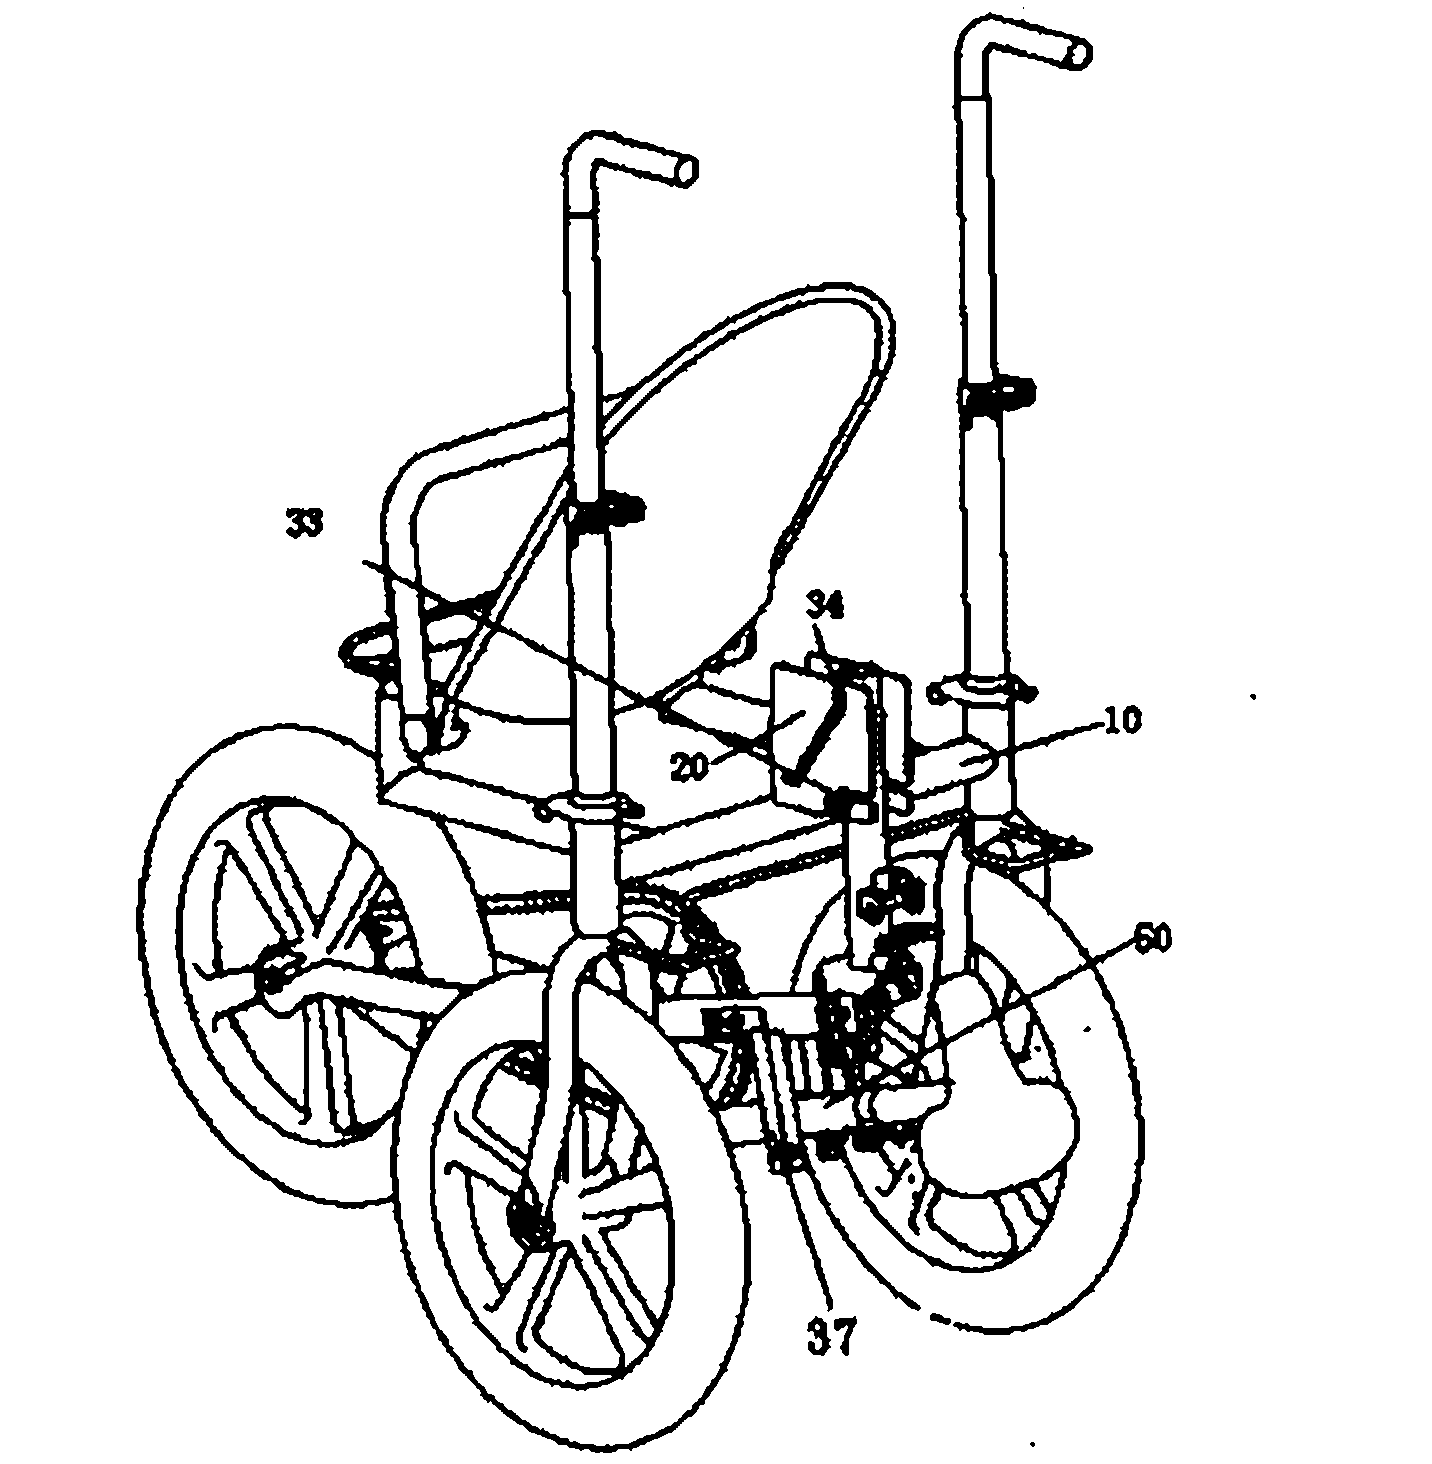 Deformable baby carriage